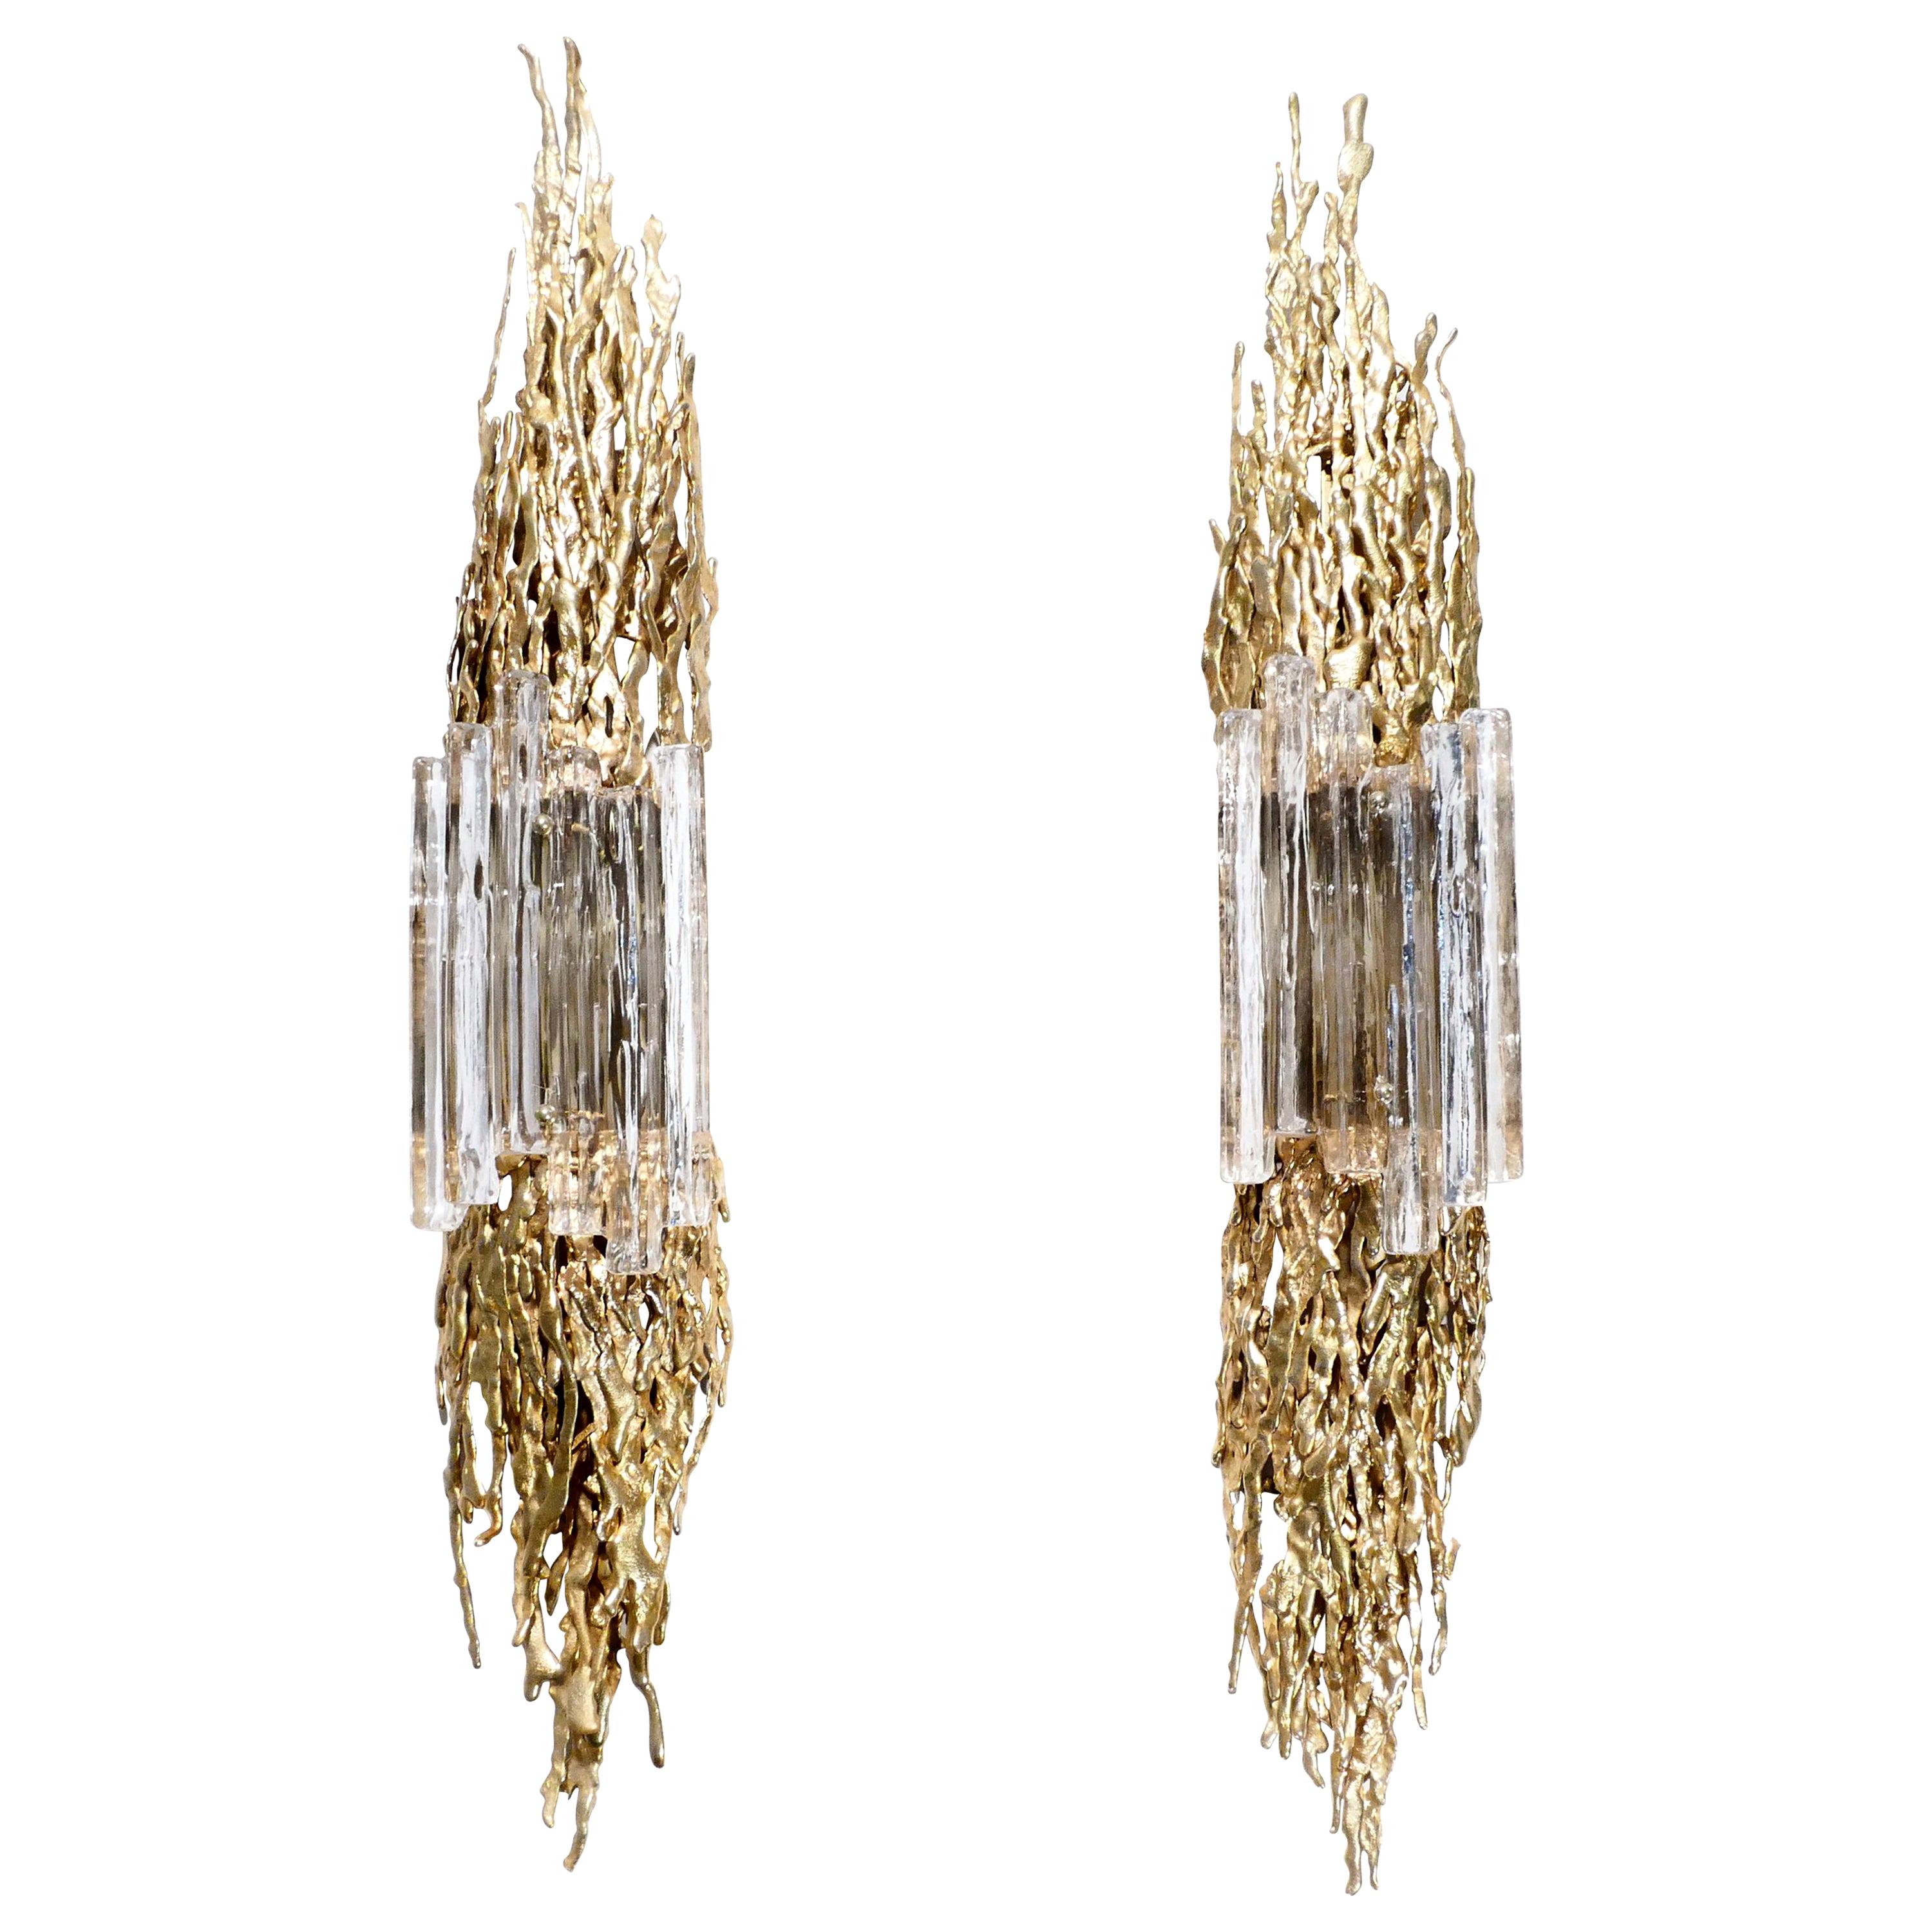 Monumental sconces by Claude Victor Boeltz in Bronze and Murano Glass, 1970s